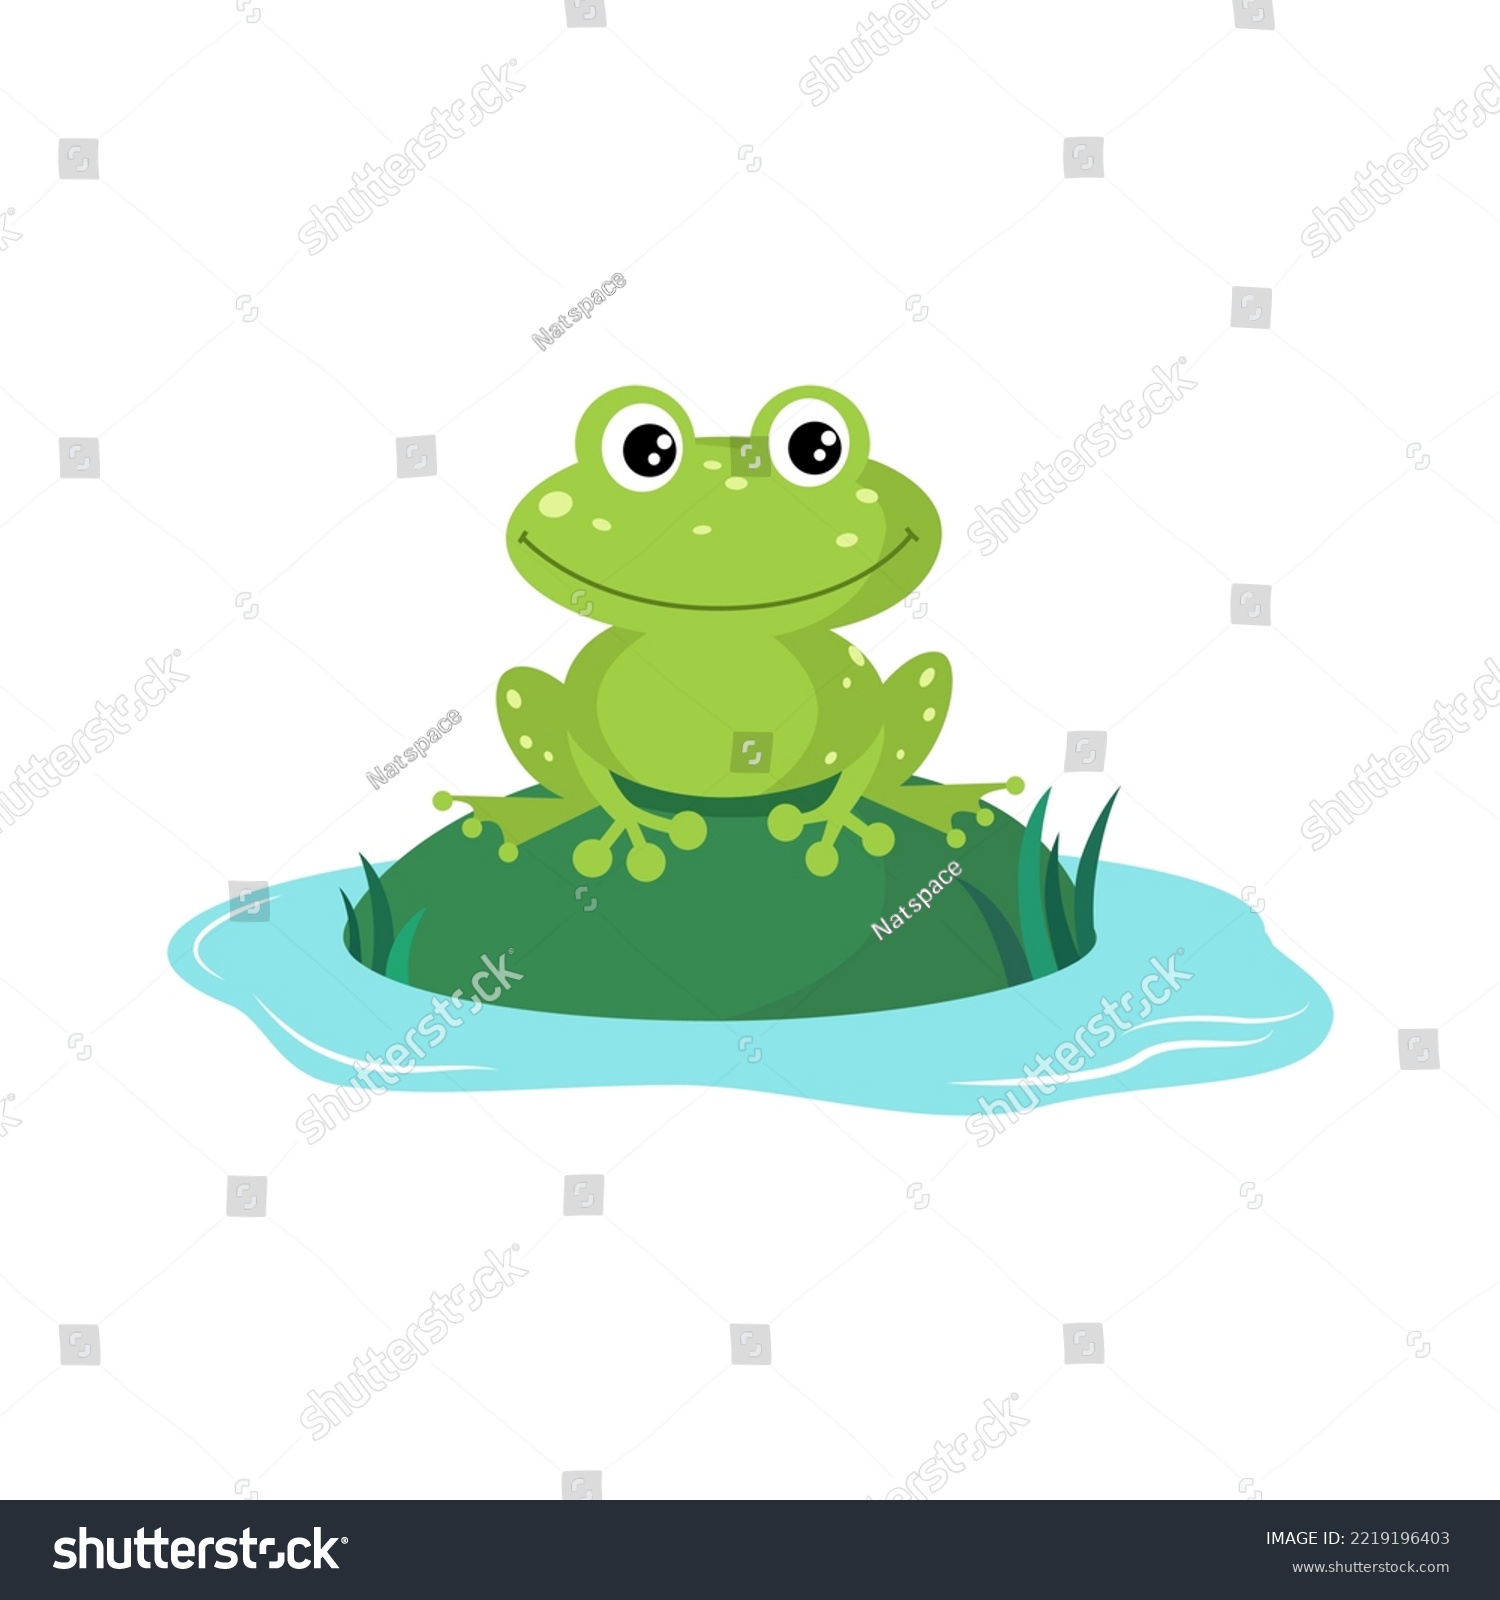 SVG of Green frog on hummock in the lake. Vector illustration in the flat style of cartoon character. svg